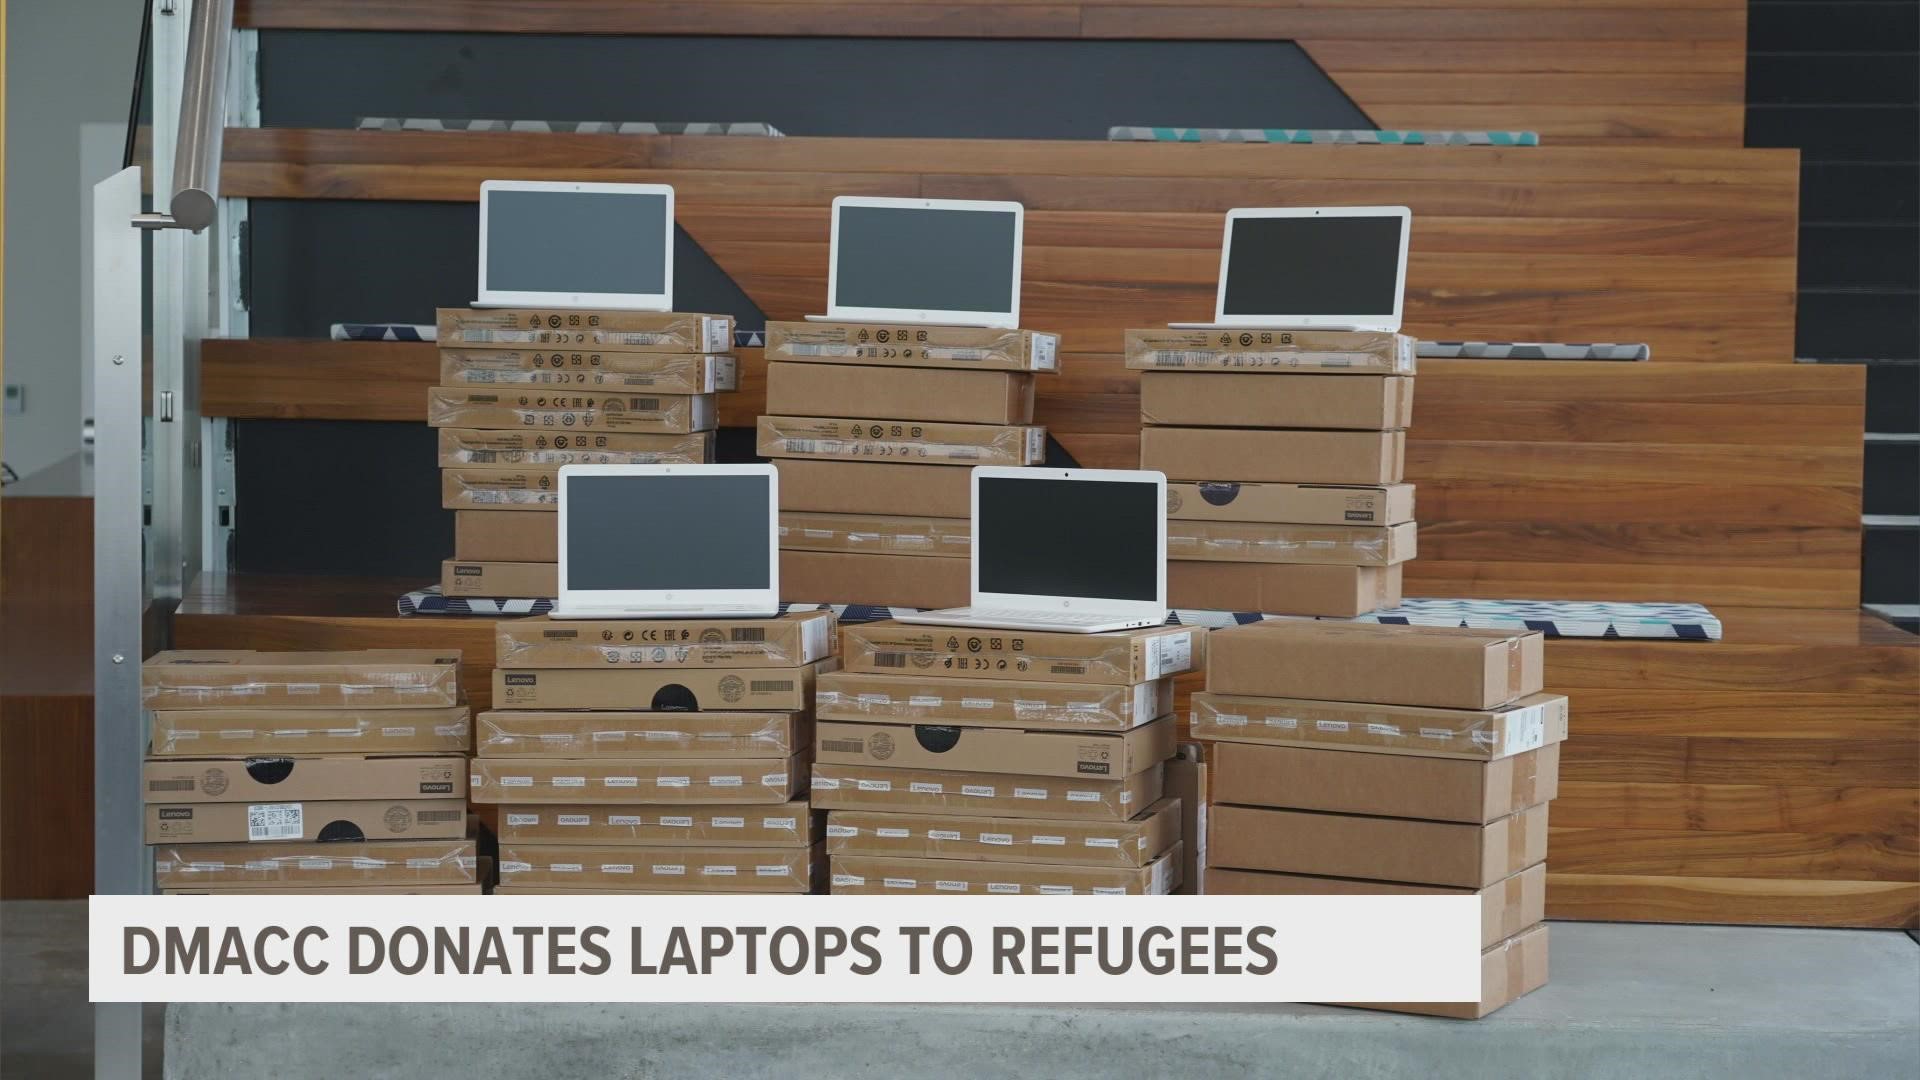 DMACC donated 50 new laptops to help refugees connect not only to family back in Afghanistan, but also to the central Iowa community.